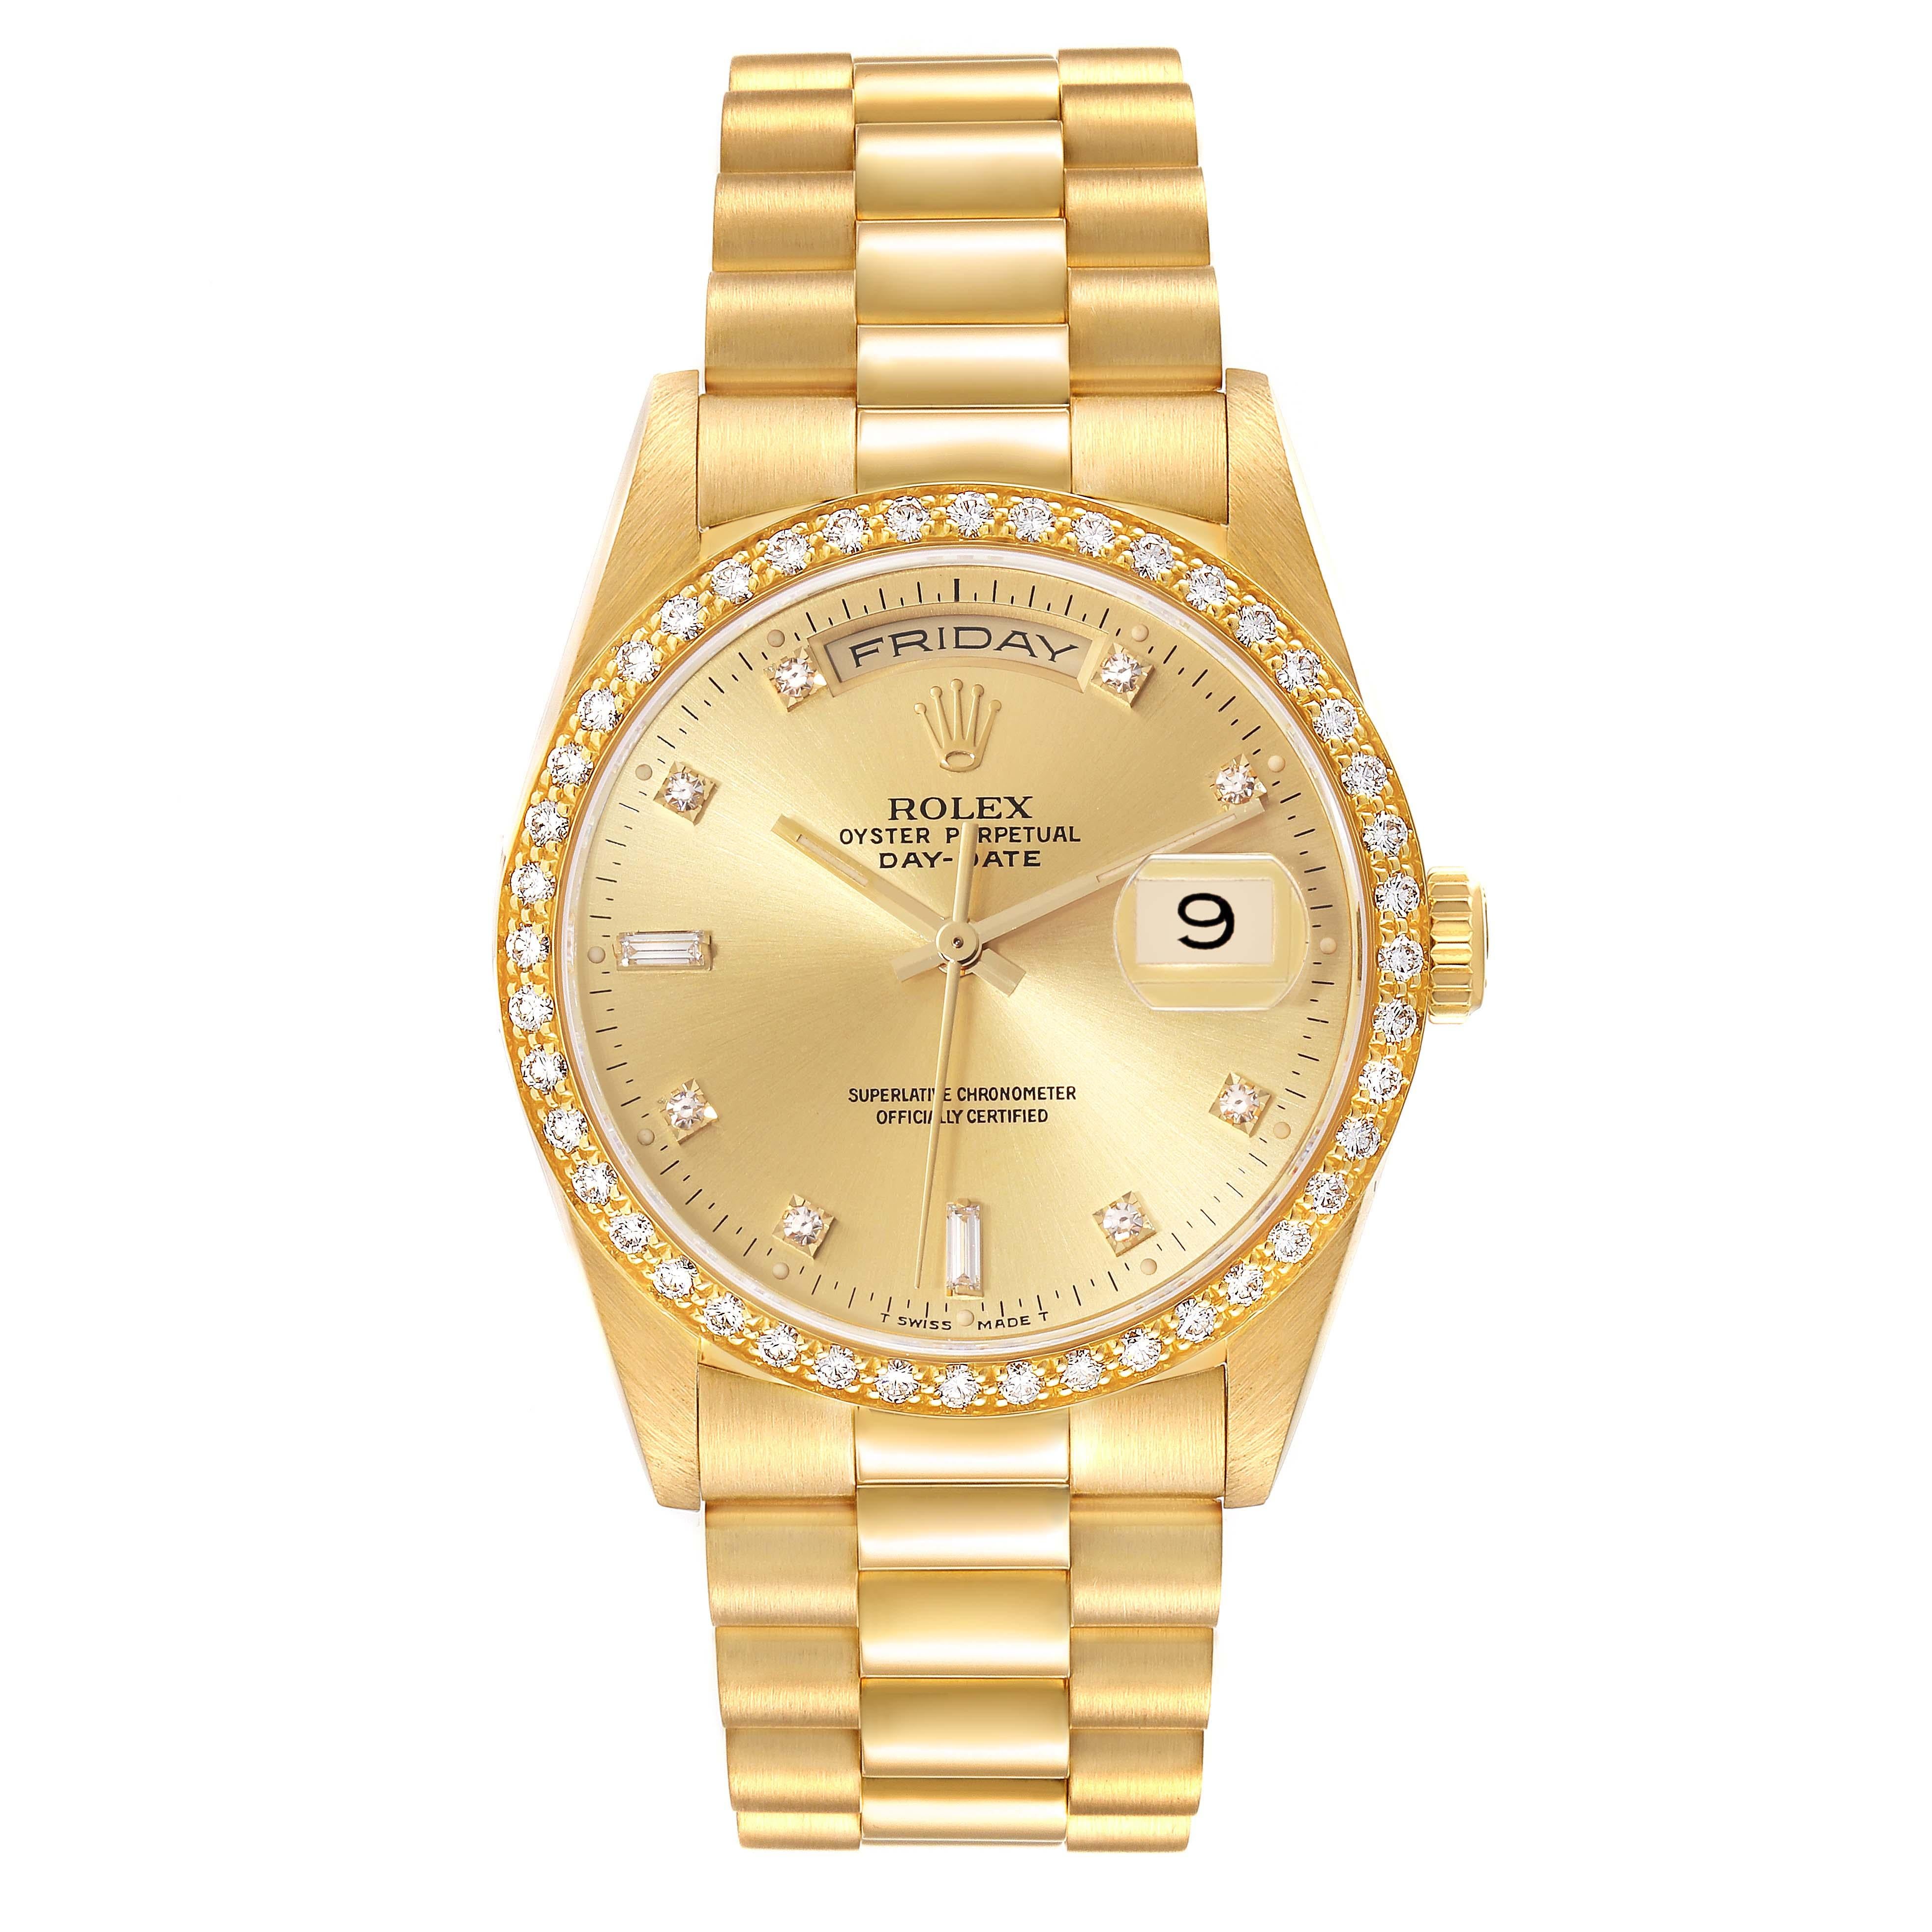 Rolex President Day Date 36mm Yellow Gold Diamond Mens Watch 18348. Officially certified chronometer automatic self-winding movement. 18k yellow gold oyster case 36 mm in diameter. Rolex logo on a crown. Original Rolex factory 18K yellow gold